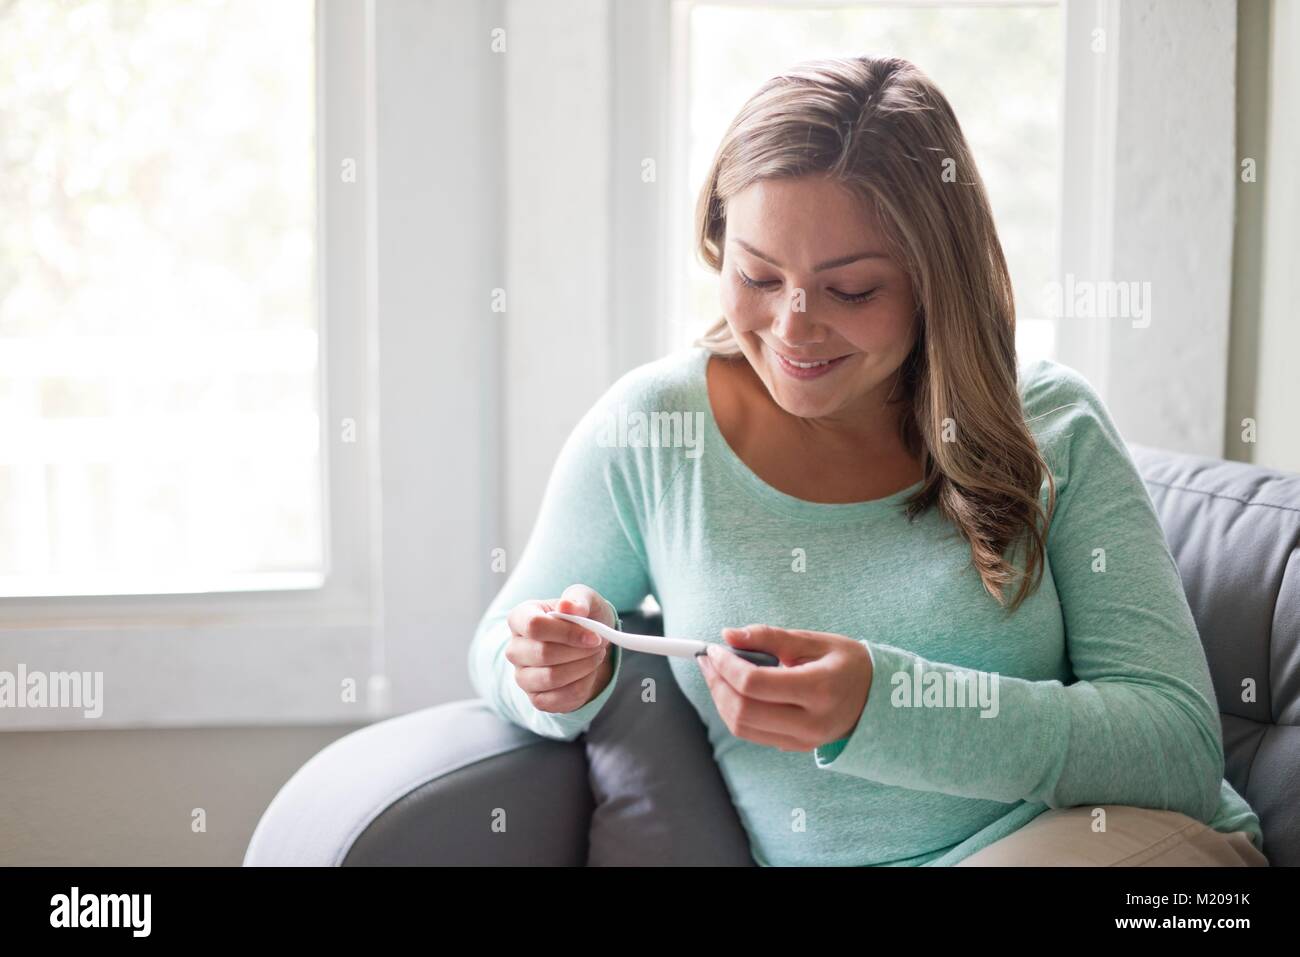 Young woman sitting on sofa and looking at pregnancy test. Stock Photo